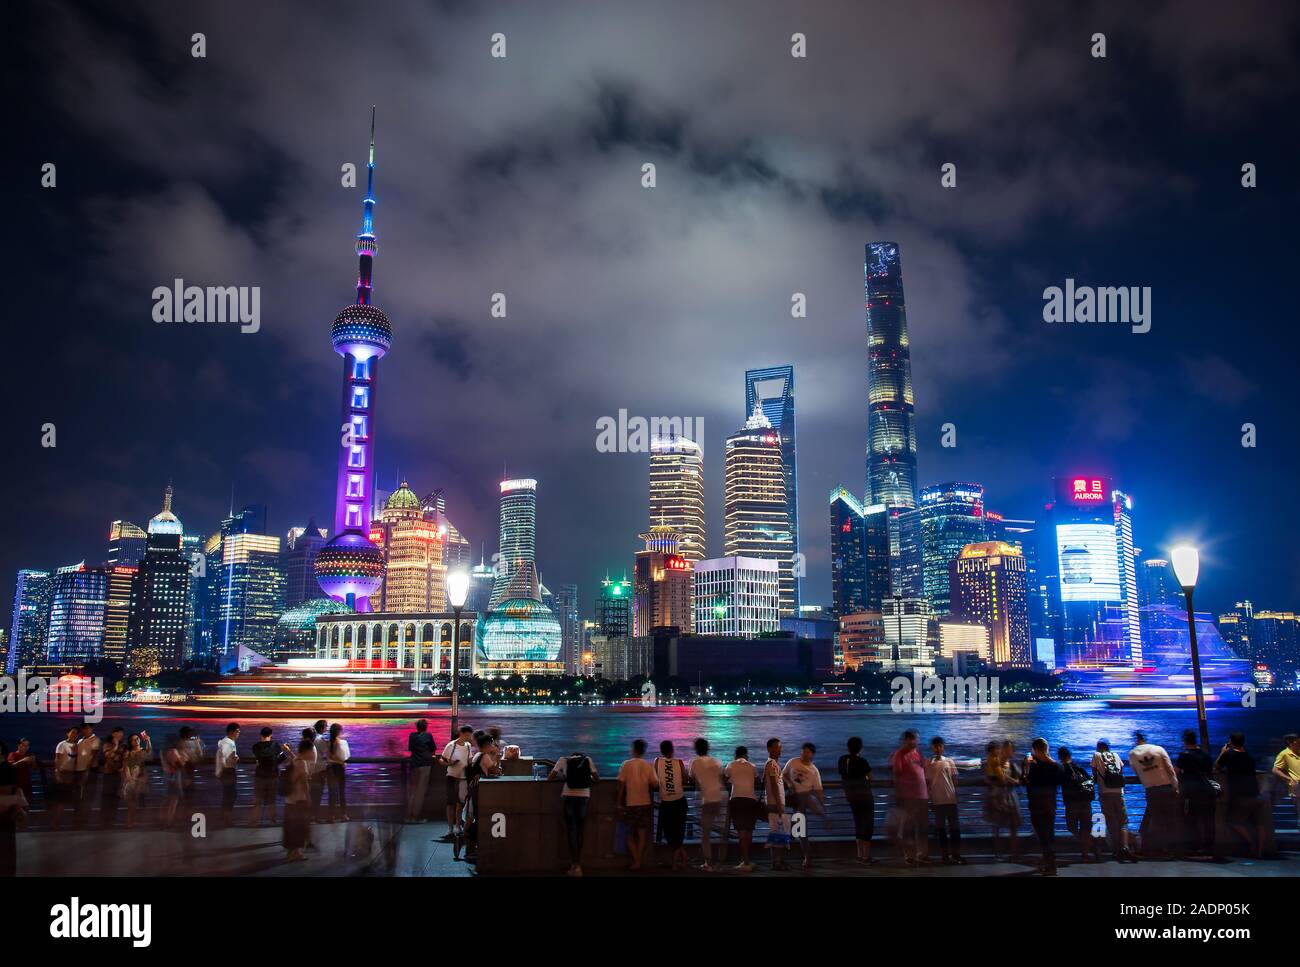 Shanghai, China - August 7, 2019: Busy Shanghai downtown with tourists enjoying the skyline with amazing skyscrapers at night Stock Photo